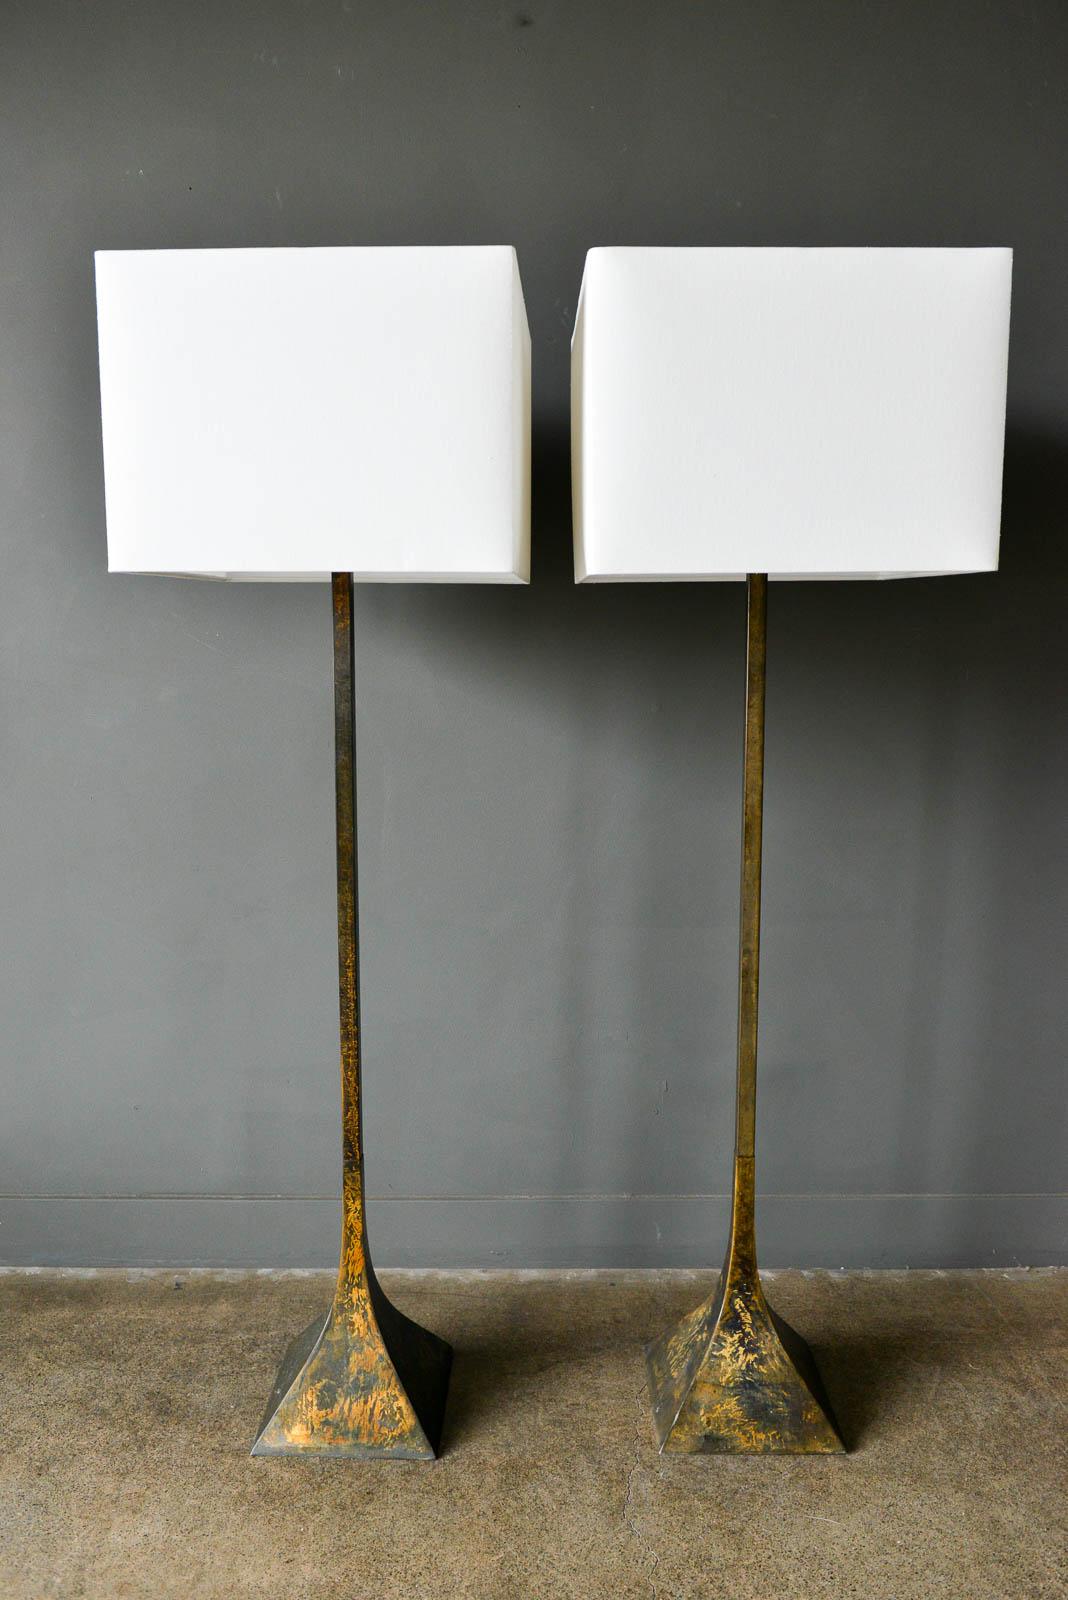 Pair of acid etched copper floor lamps by Laurel Lamp Co, ca. 1970. Beautiful patina to the bases. Matched pair measures 45